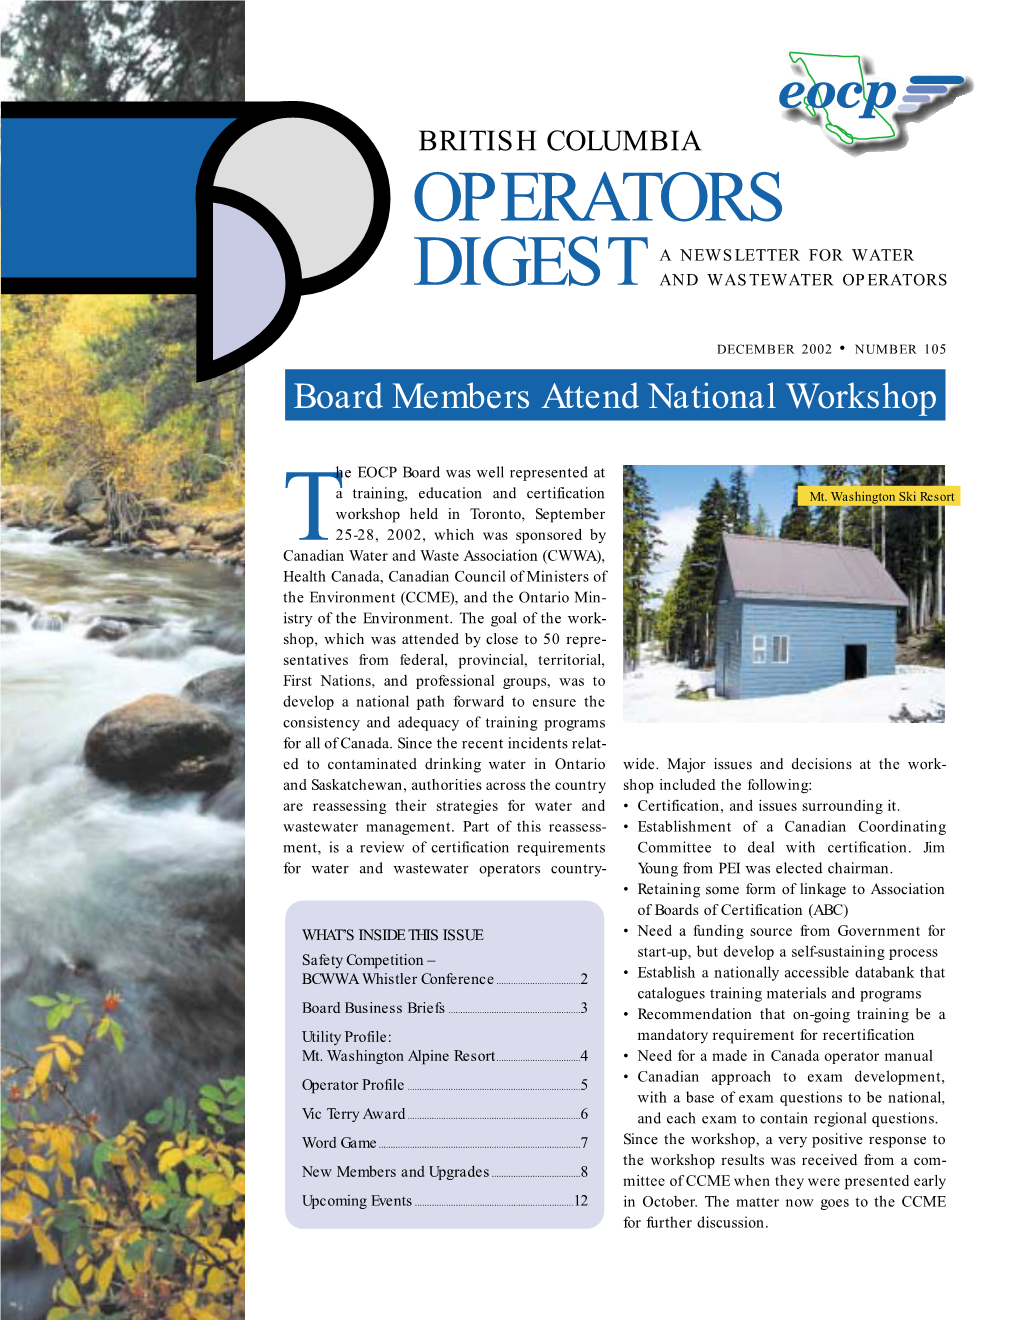 British Columbia Operators a Newsletter for Water Digest and Wastewater Operators